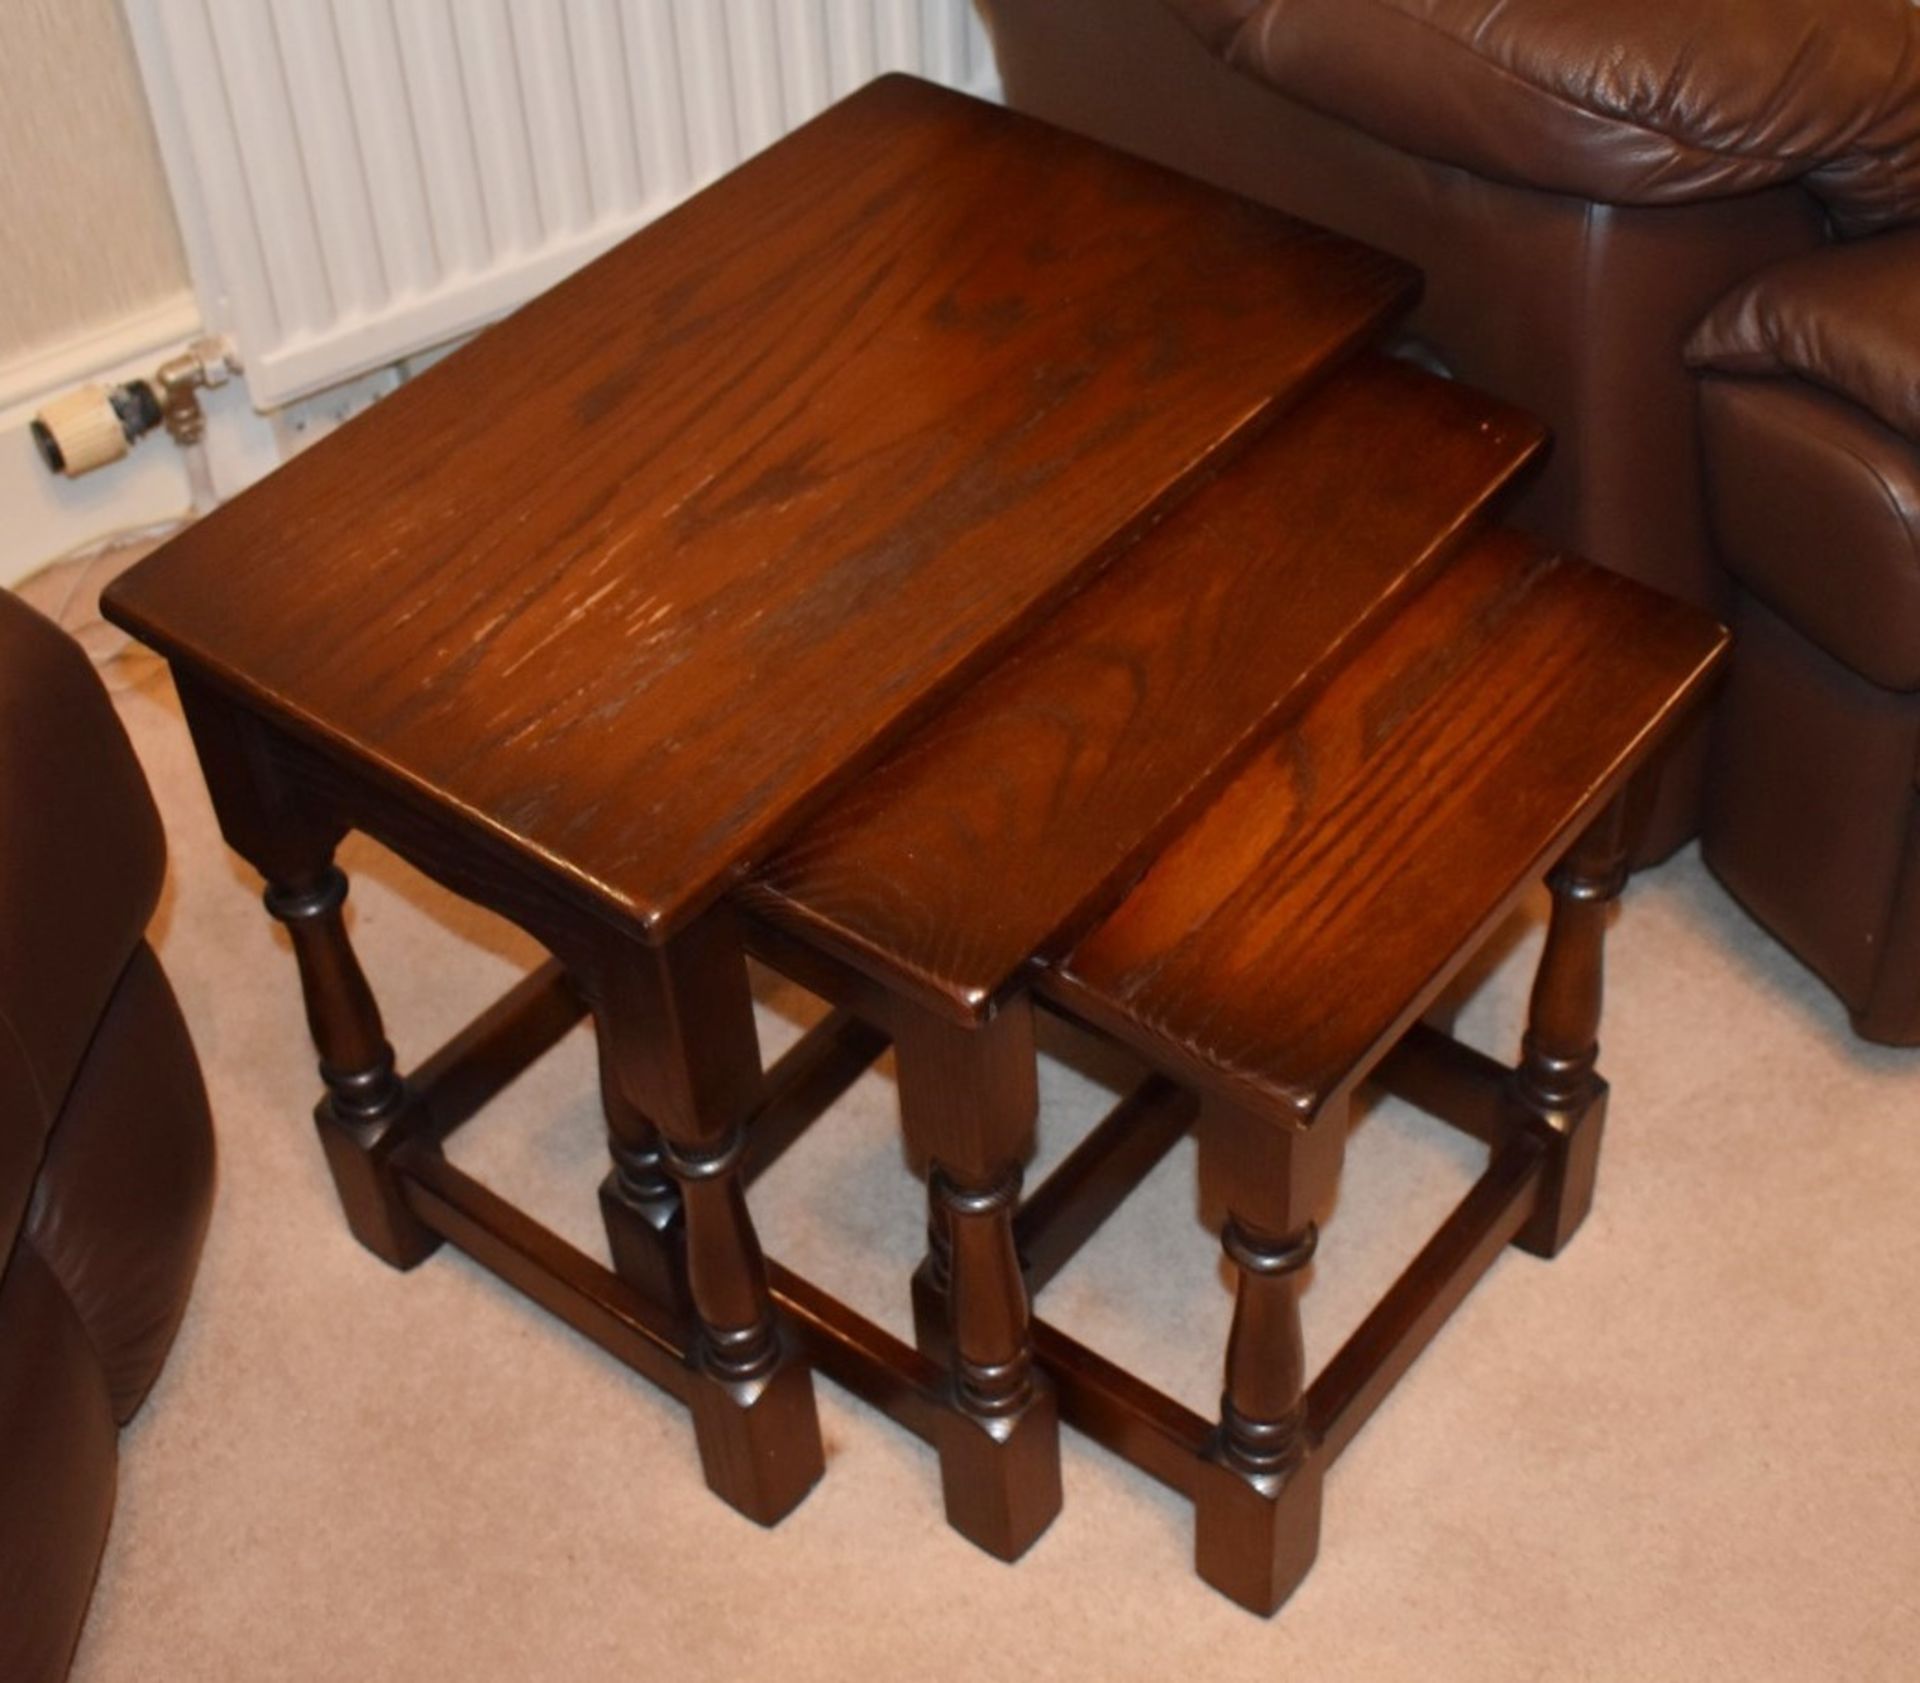 1 x Nest of Oak Tables By Jaycee - Dimensions: H46 x W55 x D35 cms - CL579 - No VAT on the - Image 4 of 5